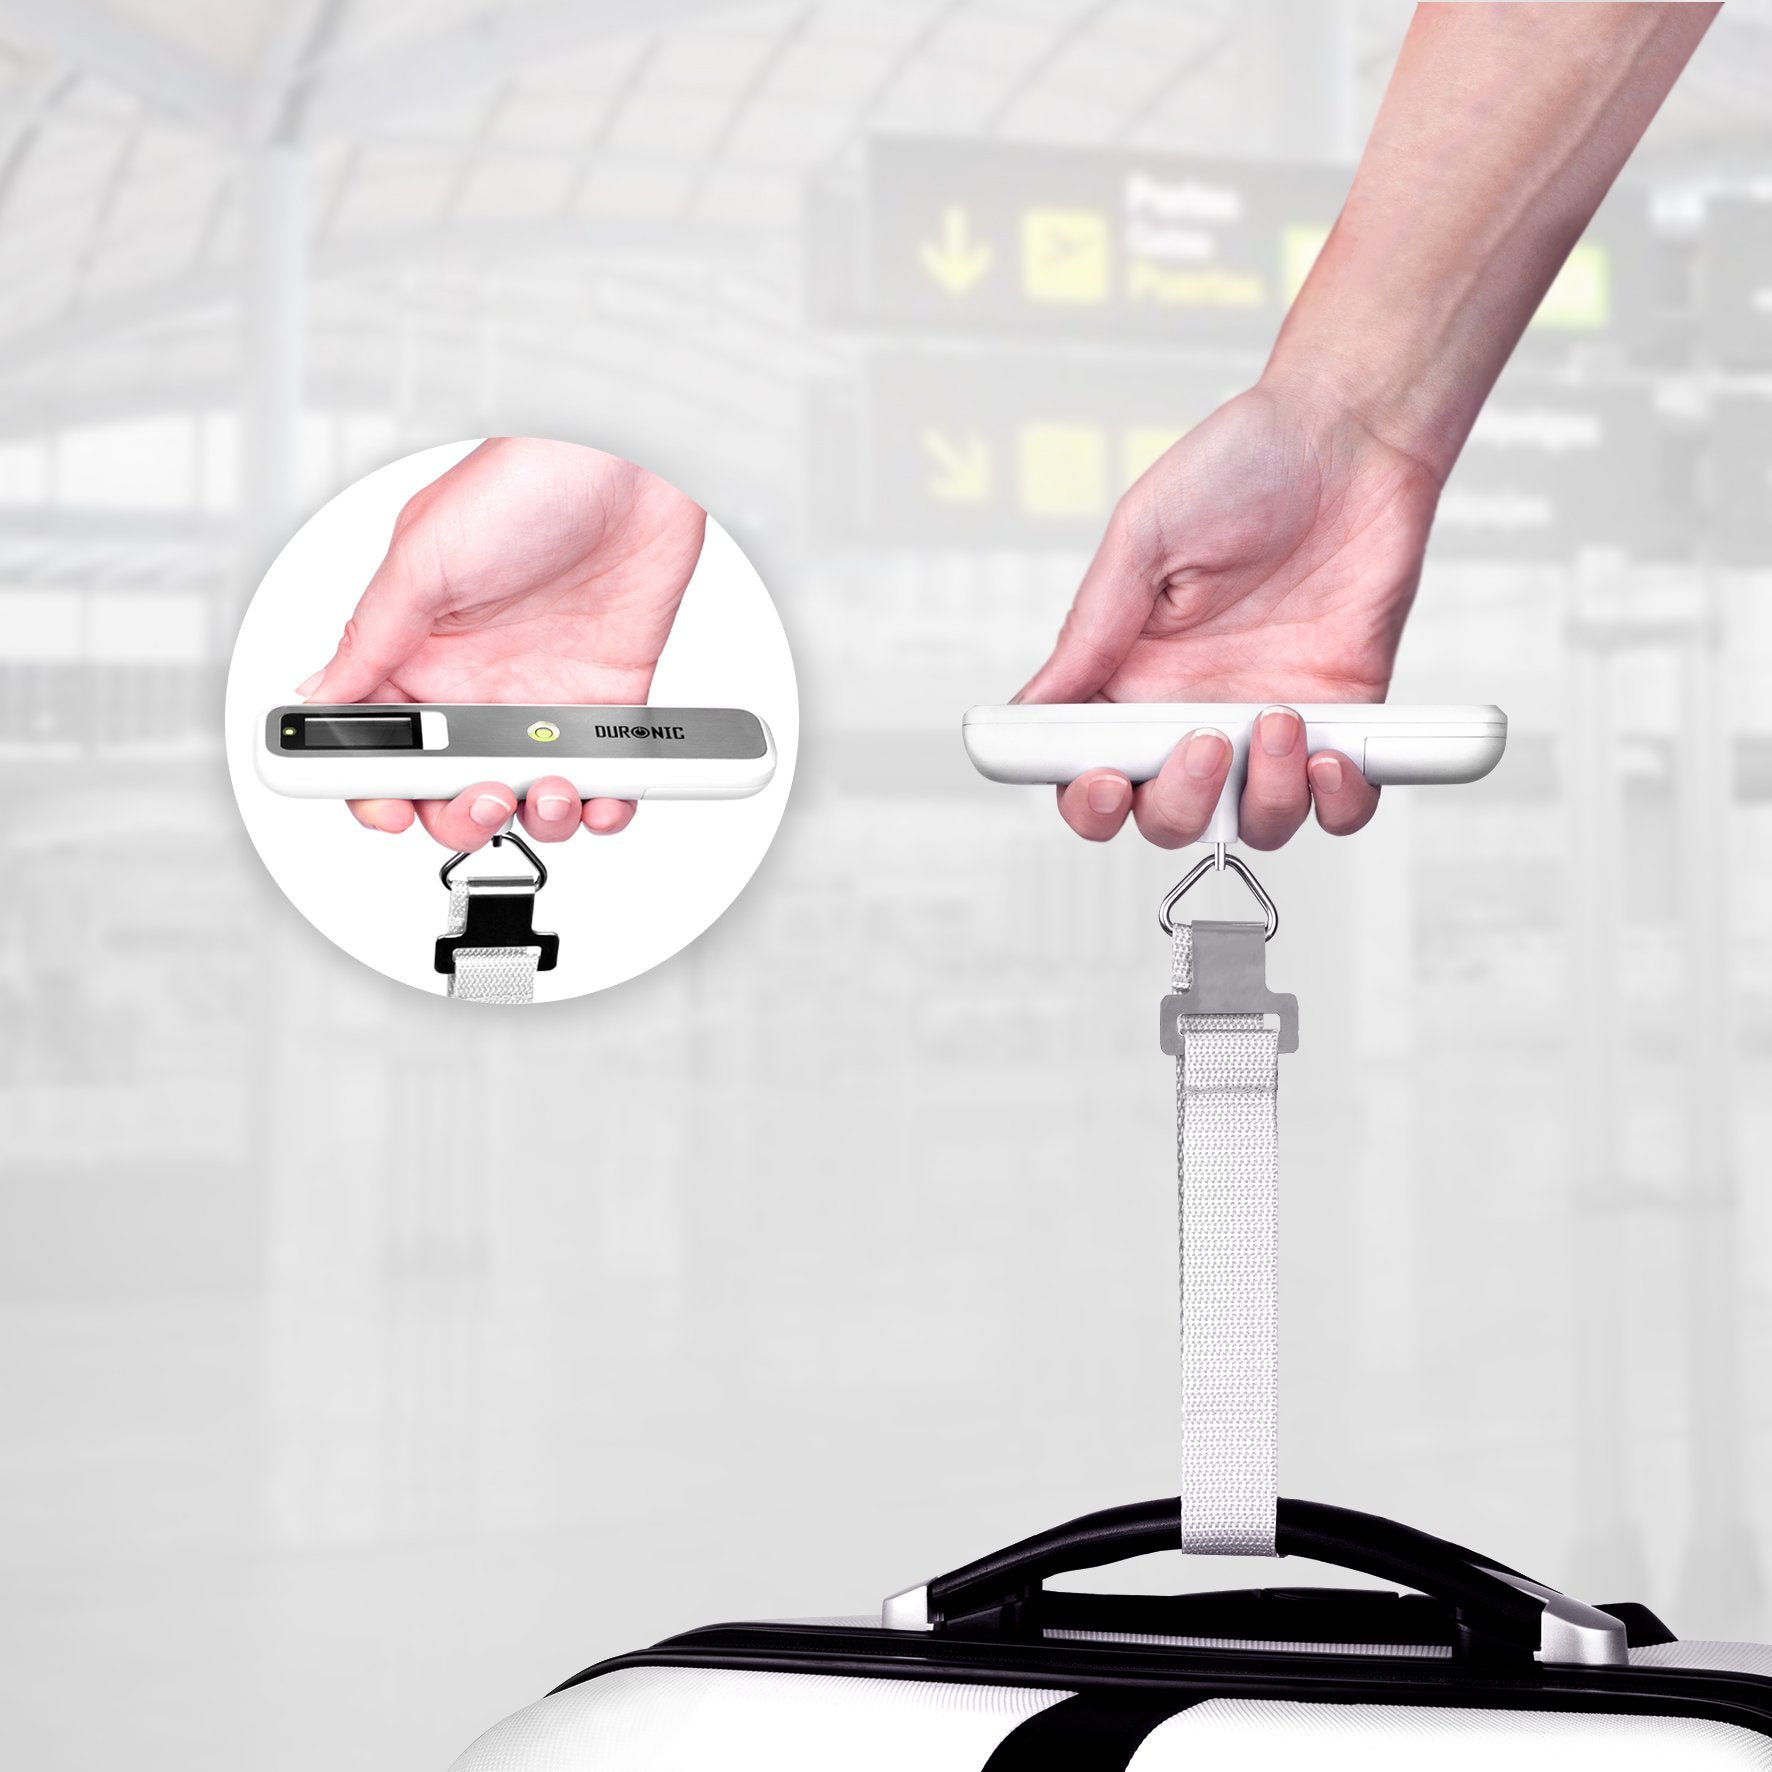 Duronic Digital Luggage Scales LS1019 | 50kg capacity | Weighs Suitcases and Bags | Compact & Portable | Strong Straps | For Air Travel | Battery Included